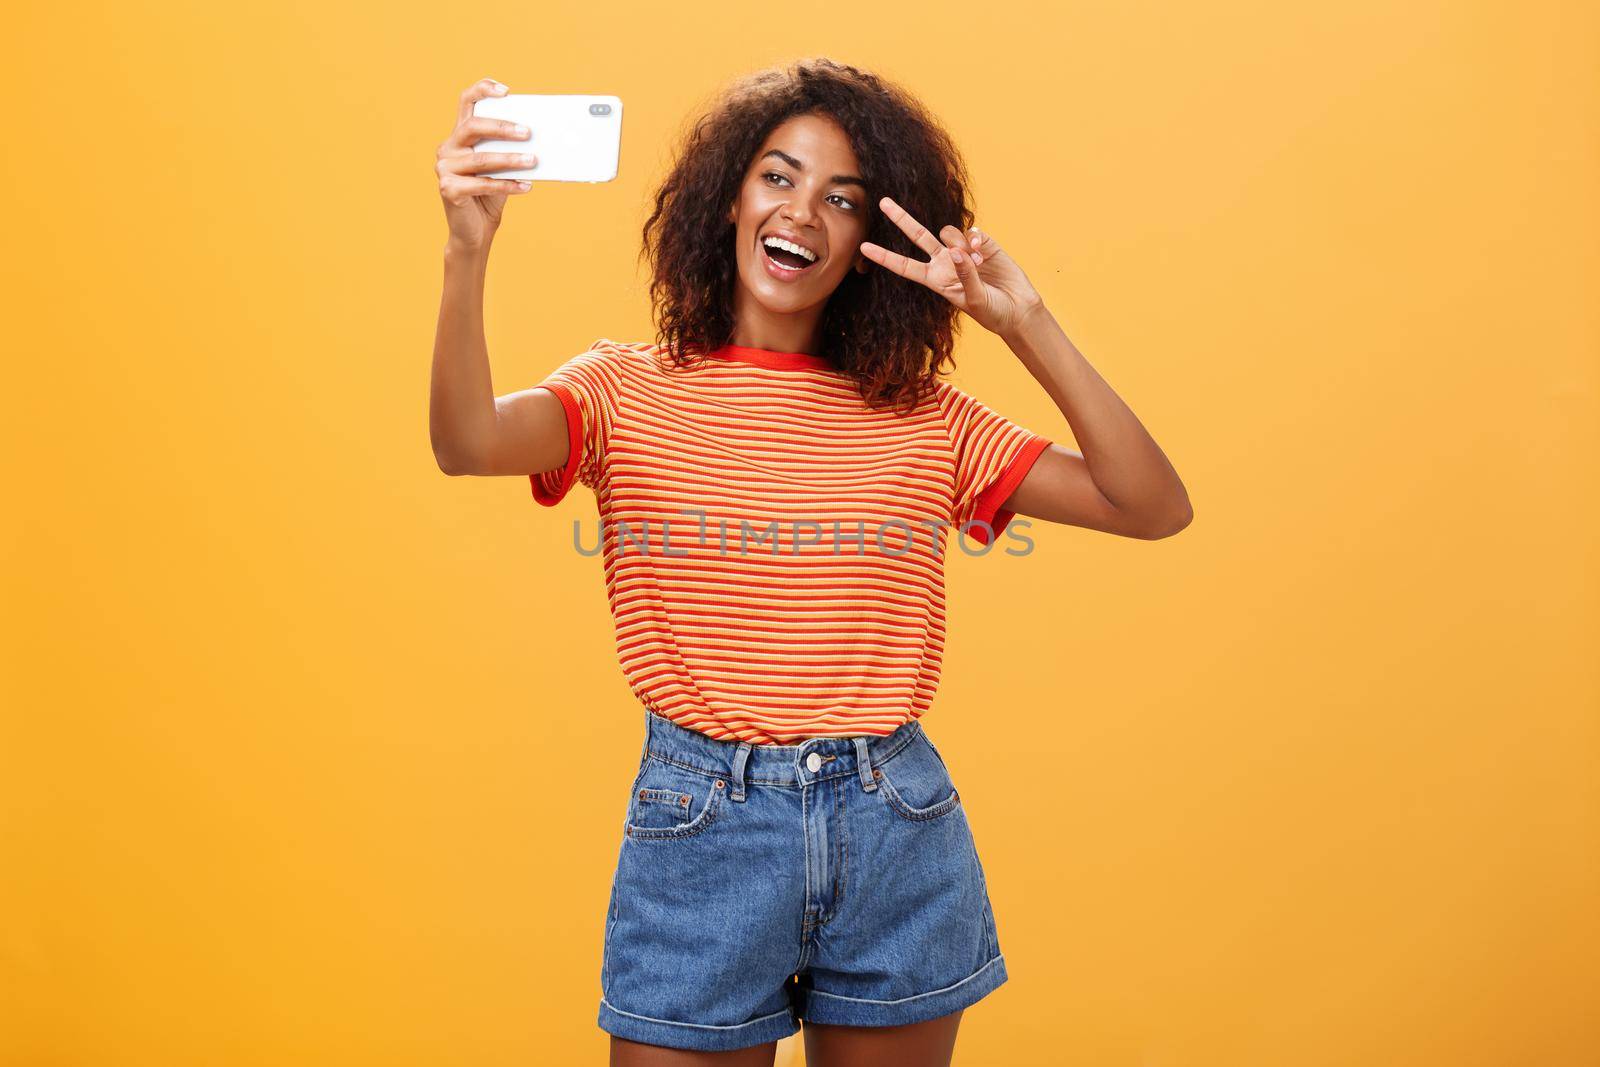 Girl making video vlog with brand new smartphone posting in internet trying become famous standing over orange background posing for selfie gazing at gadget screen showing peace or victory gesture by Benzoix